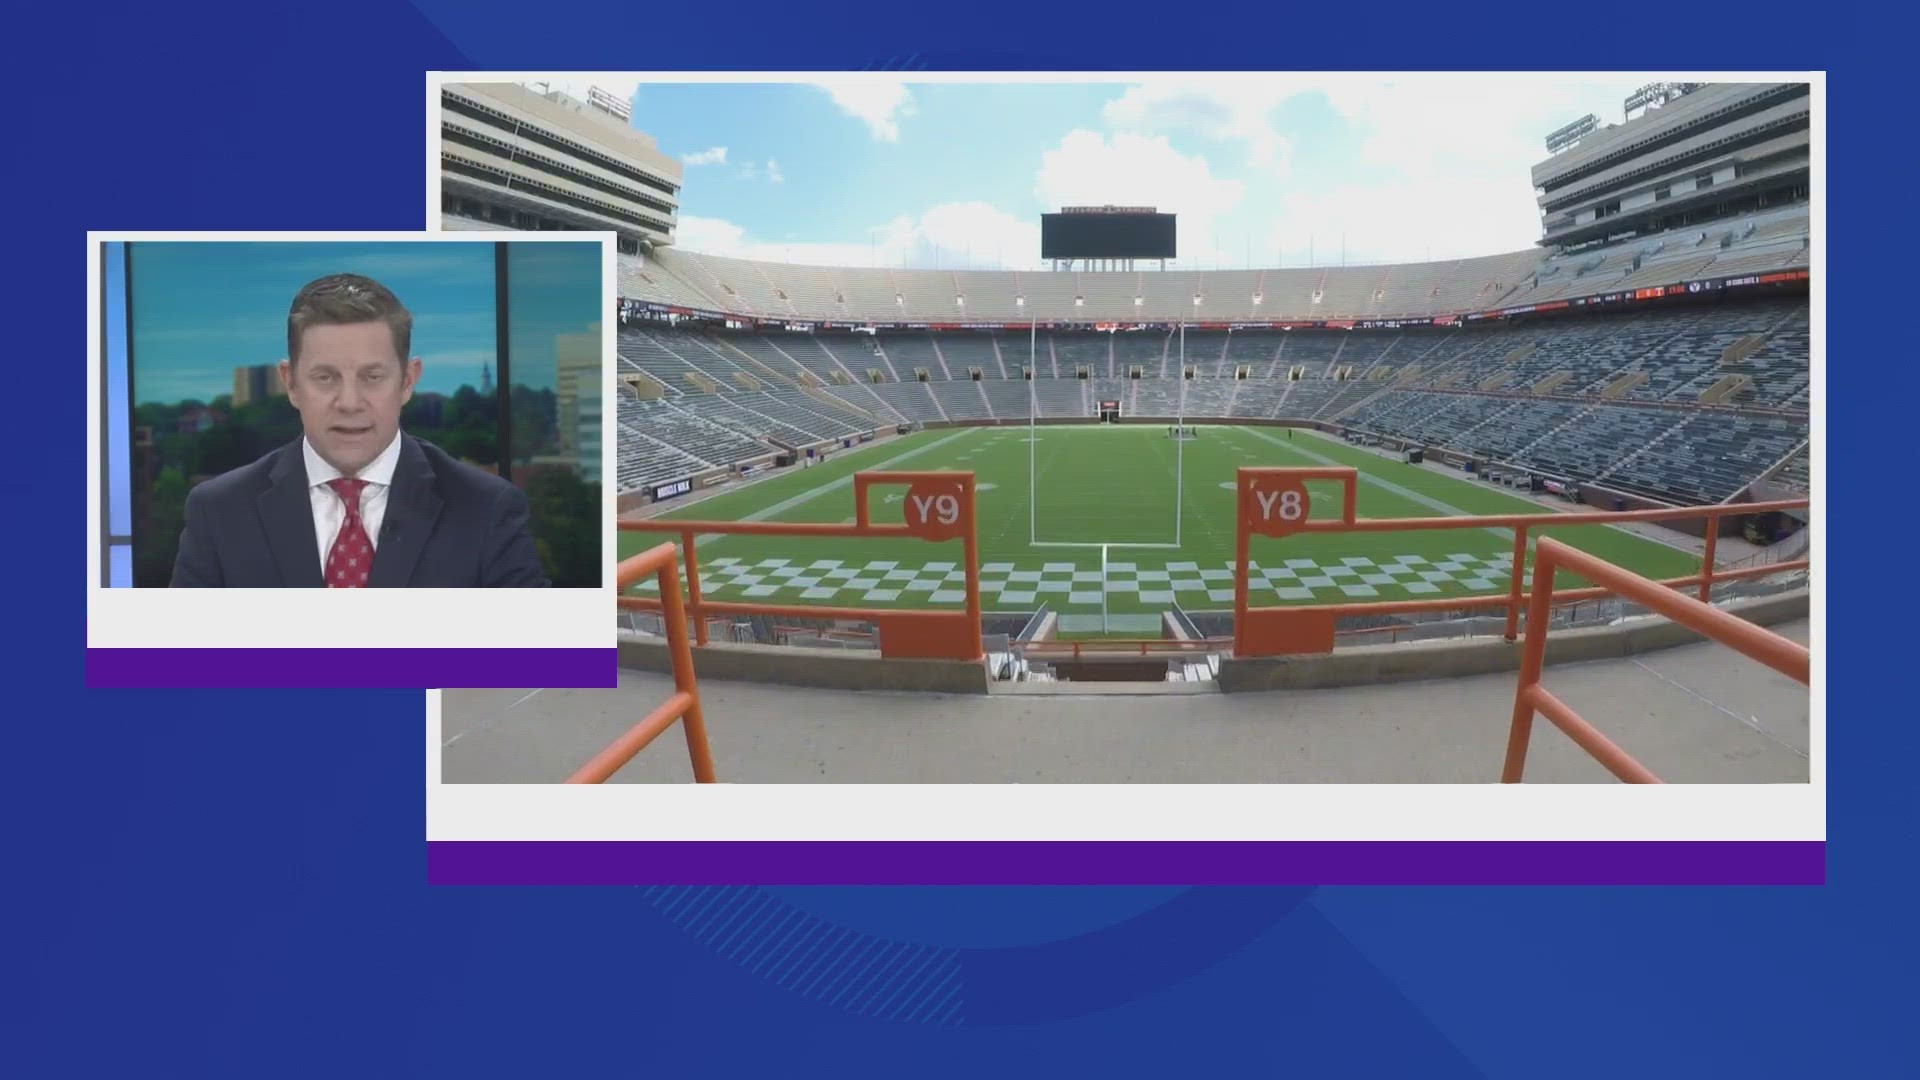 Tennessee Athletics said the Wi-Fi network will be designed to deliver signals through the stadium's concrete and steel, while also serving surrounding plazas.